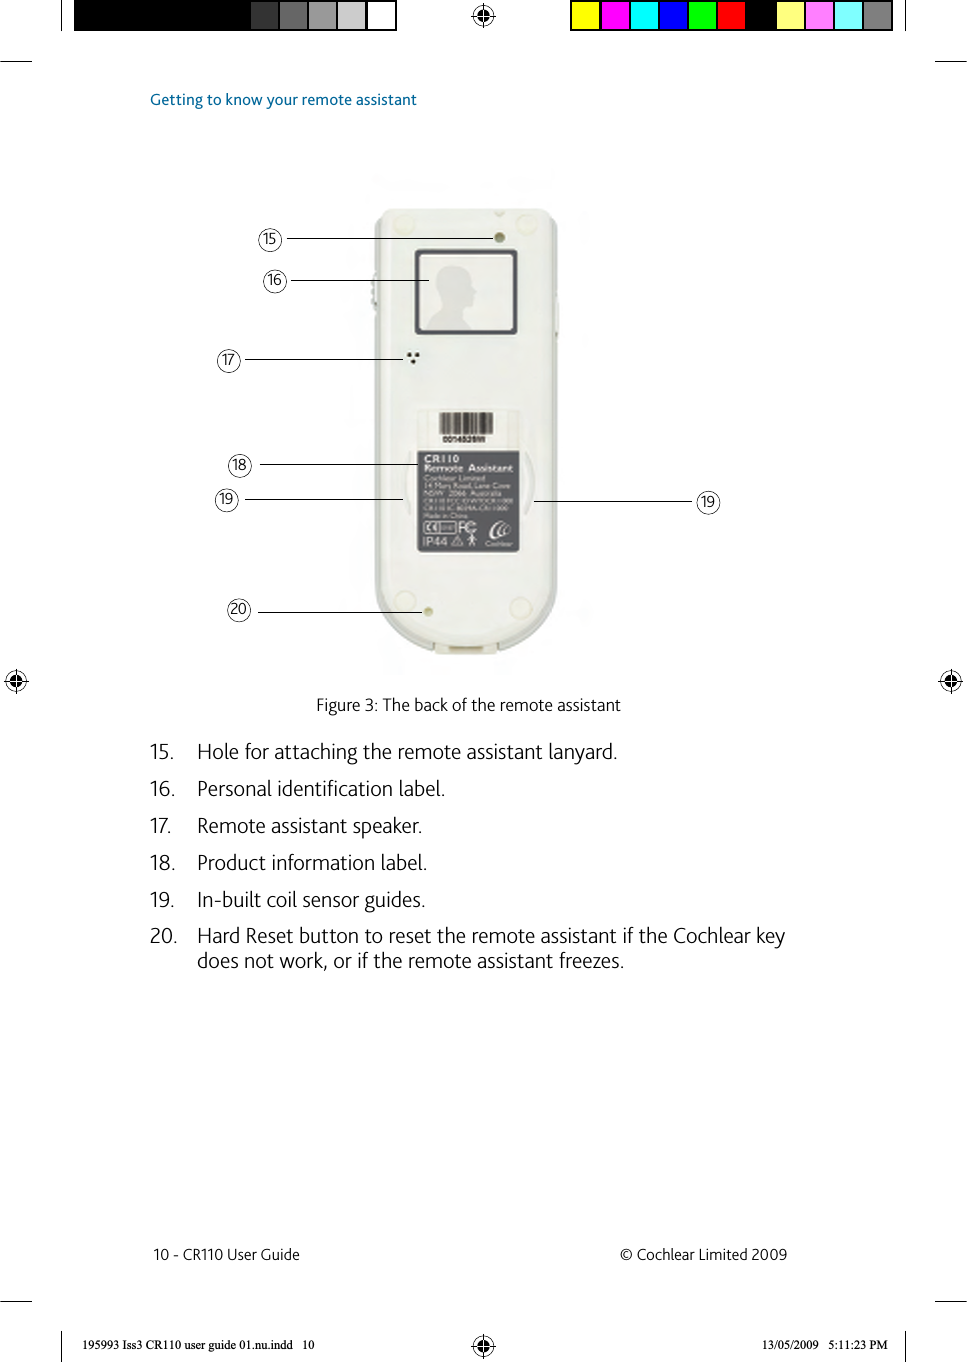 Figure 3: The back of the remote assistantHole for attaching the remote assistant lanyard.15. Personal identiﬁ cation label.16. Remote assistant speaker.17. Product information label.18. In-built coil sensor guides.19. Hard Reset button to reset the remote assistant if the Cochlear key 20. does not work, or if the remote assistant freezes.1516171819 1920 10 - CR110 User Guide  © Cochlear Limited 2009Getting to know your remote assistant195993 Iss3 CR110 user guide 01.nu.indd   10 13/05/2009   5:11:23 PM